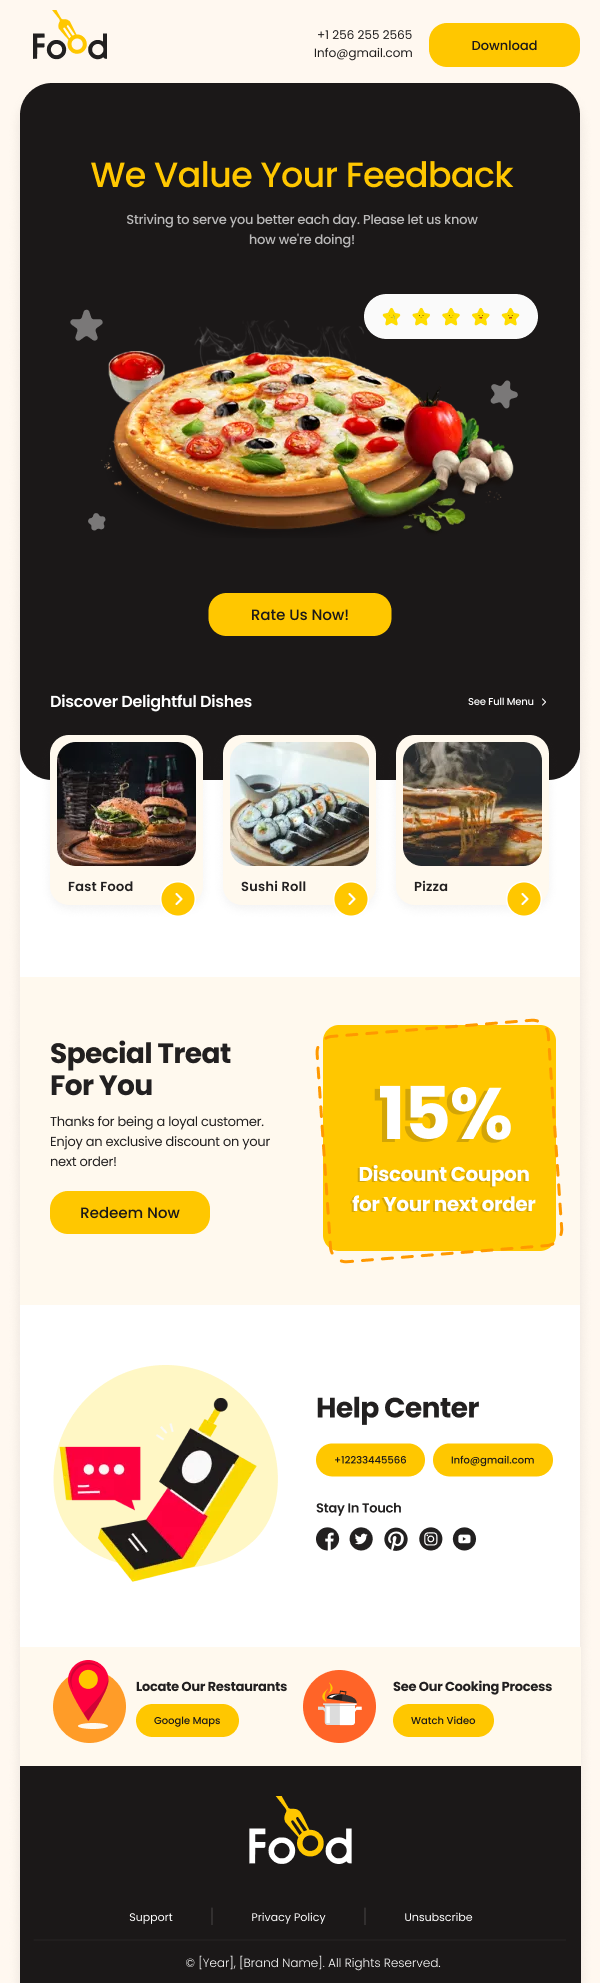 Restaurant-Review And Discount